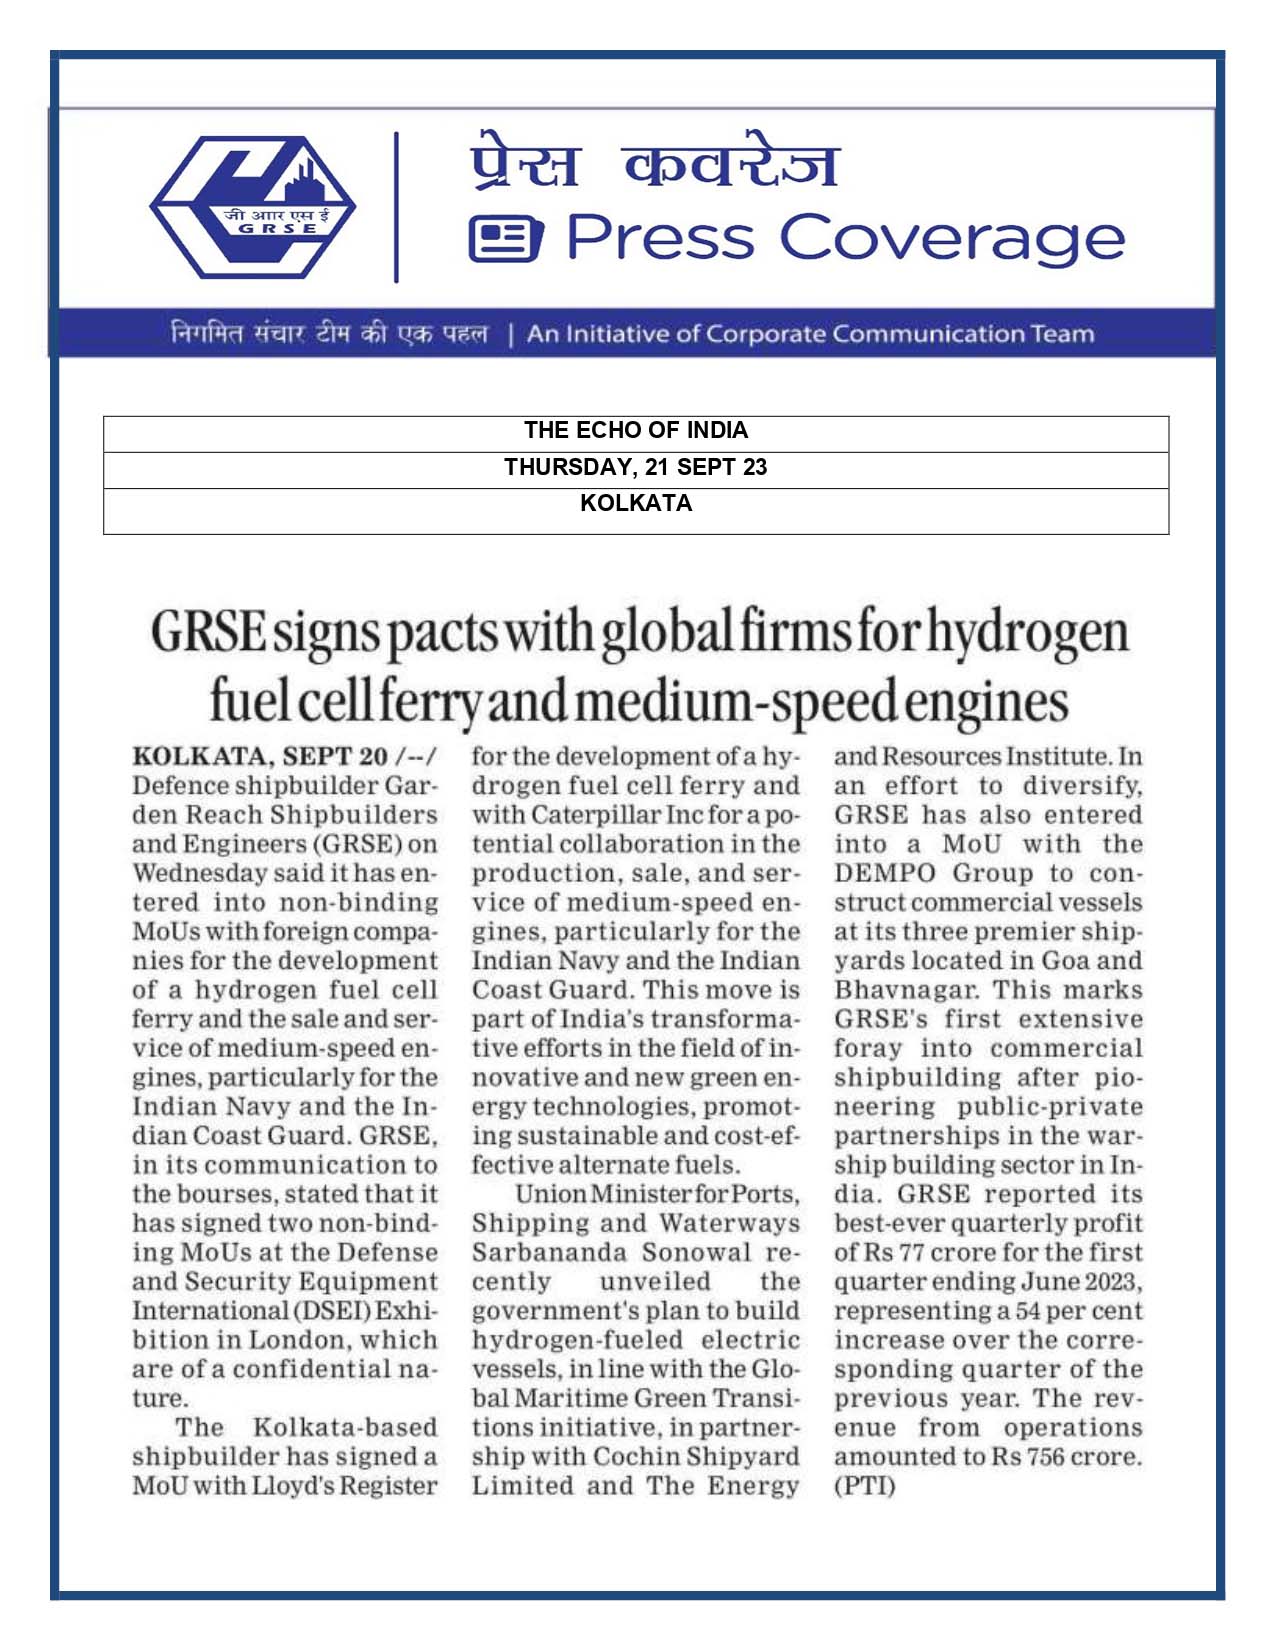 Press Coverage : The Echo of India, 21 Sep 23 : GRSE signs pacts with global firms for hydrogen fuel cell ferry and medium speed engines